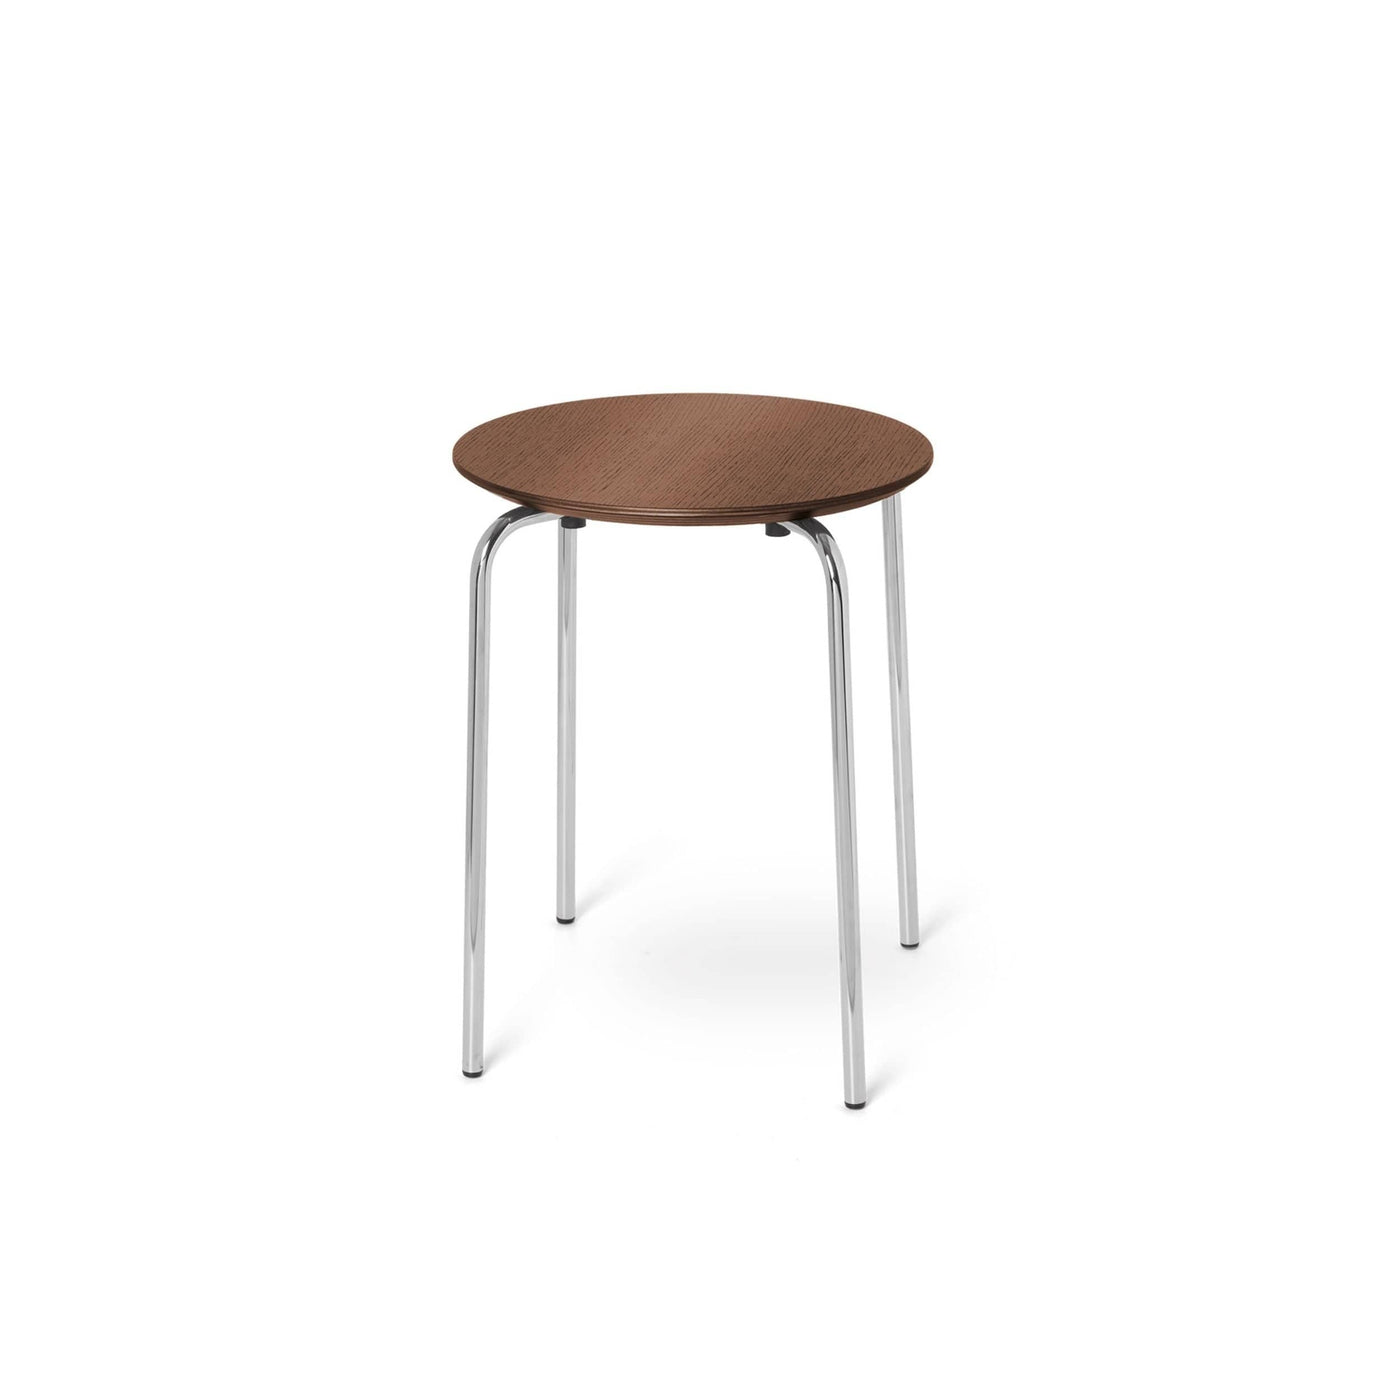 ferm living herman stool in walnut with chrome legs. Available from someday designs. #colour_walnut